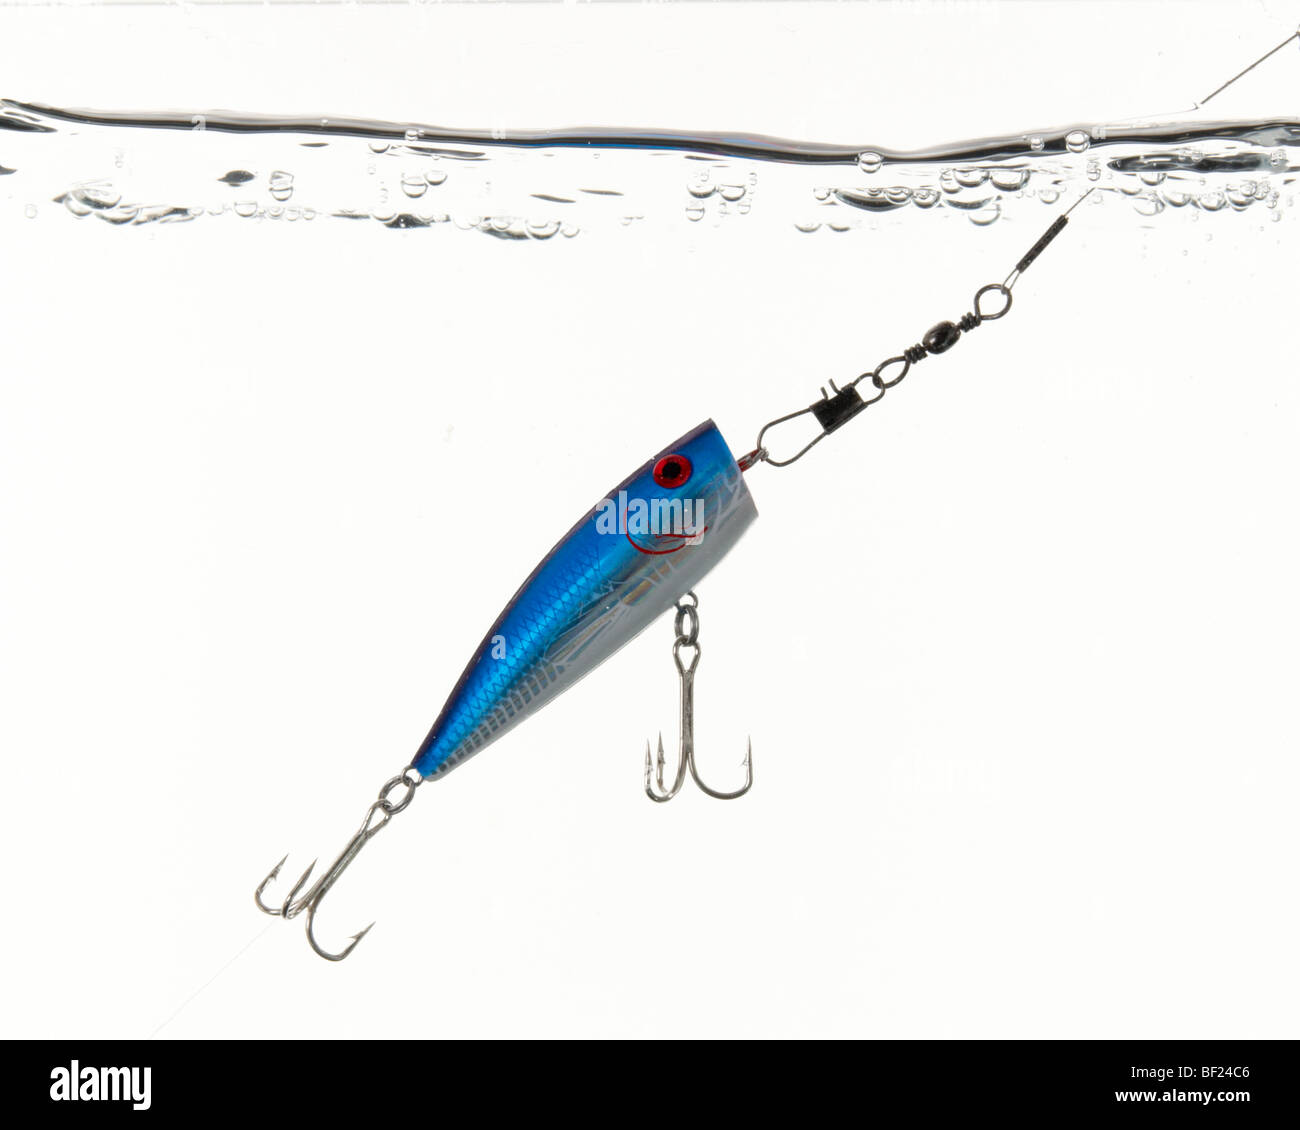 Blue surface popper fishing pike lure, underwater shot with surface of water showing Stock Photo